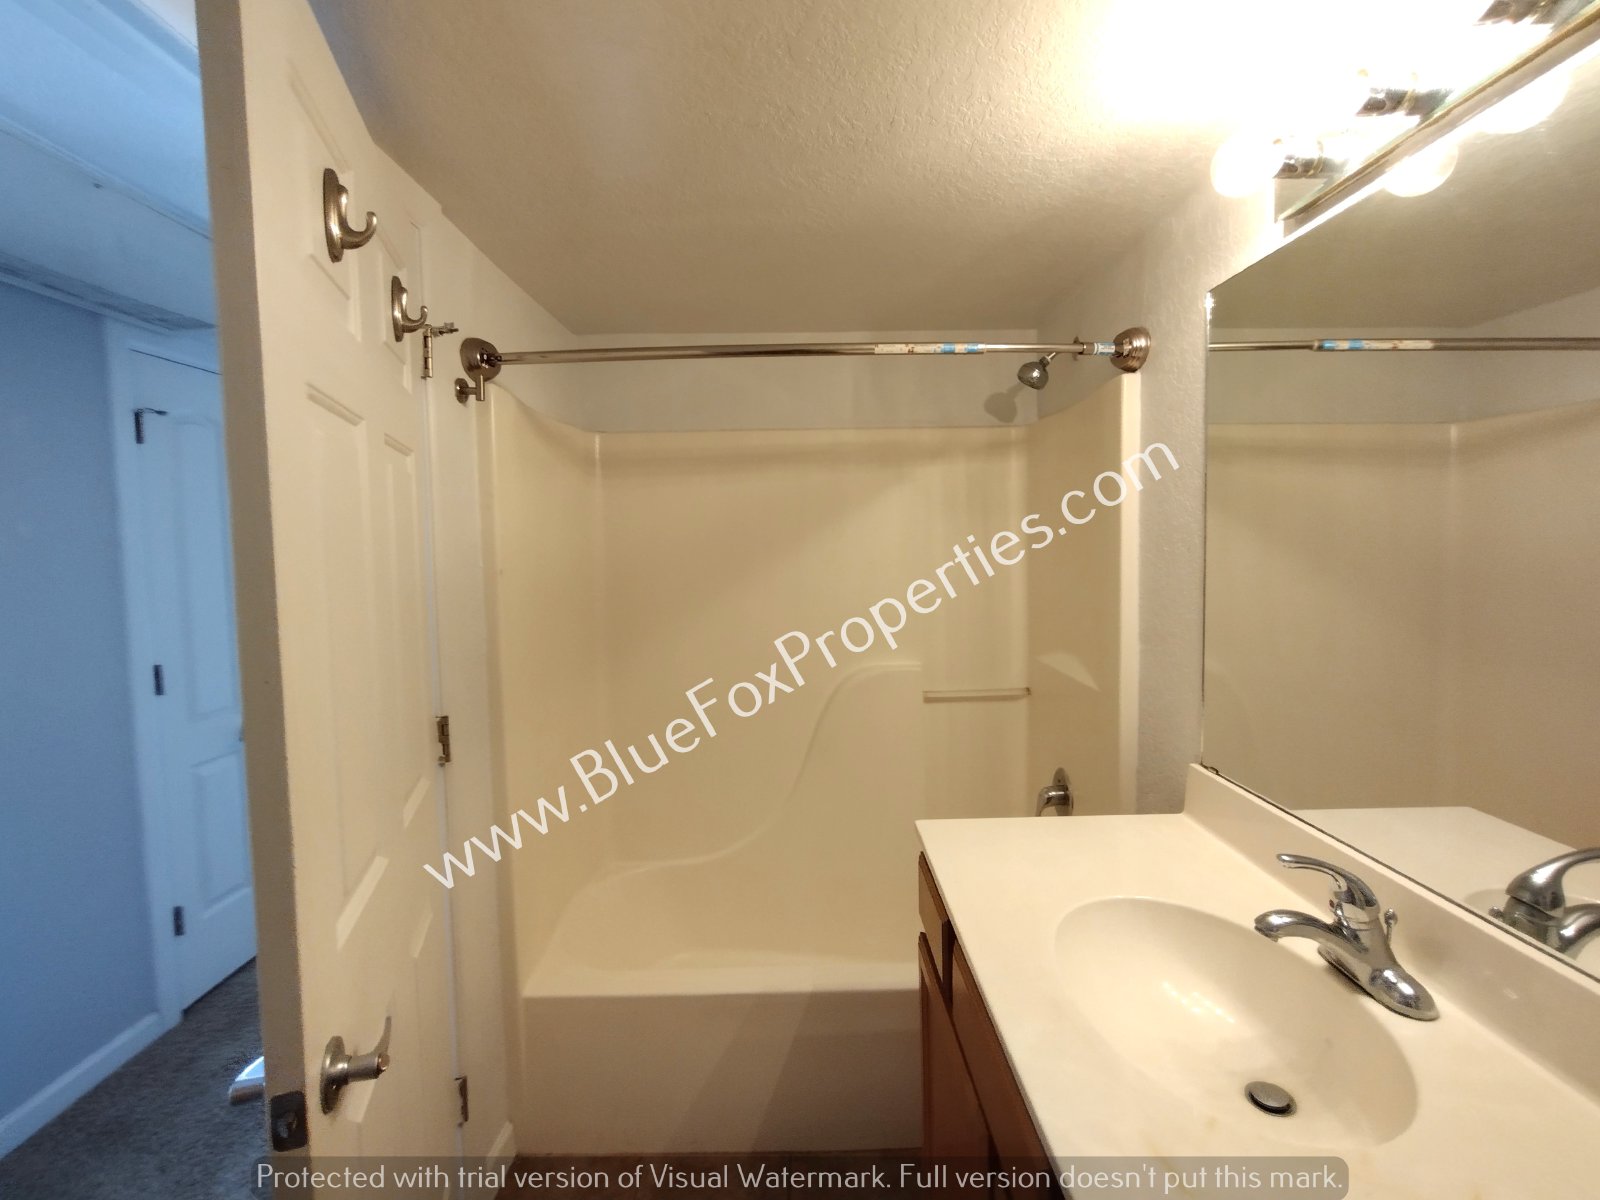 101 S Players Club Dr Apt 11204 property image